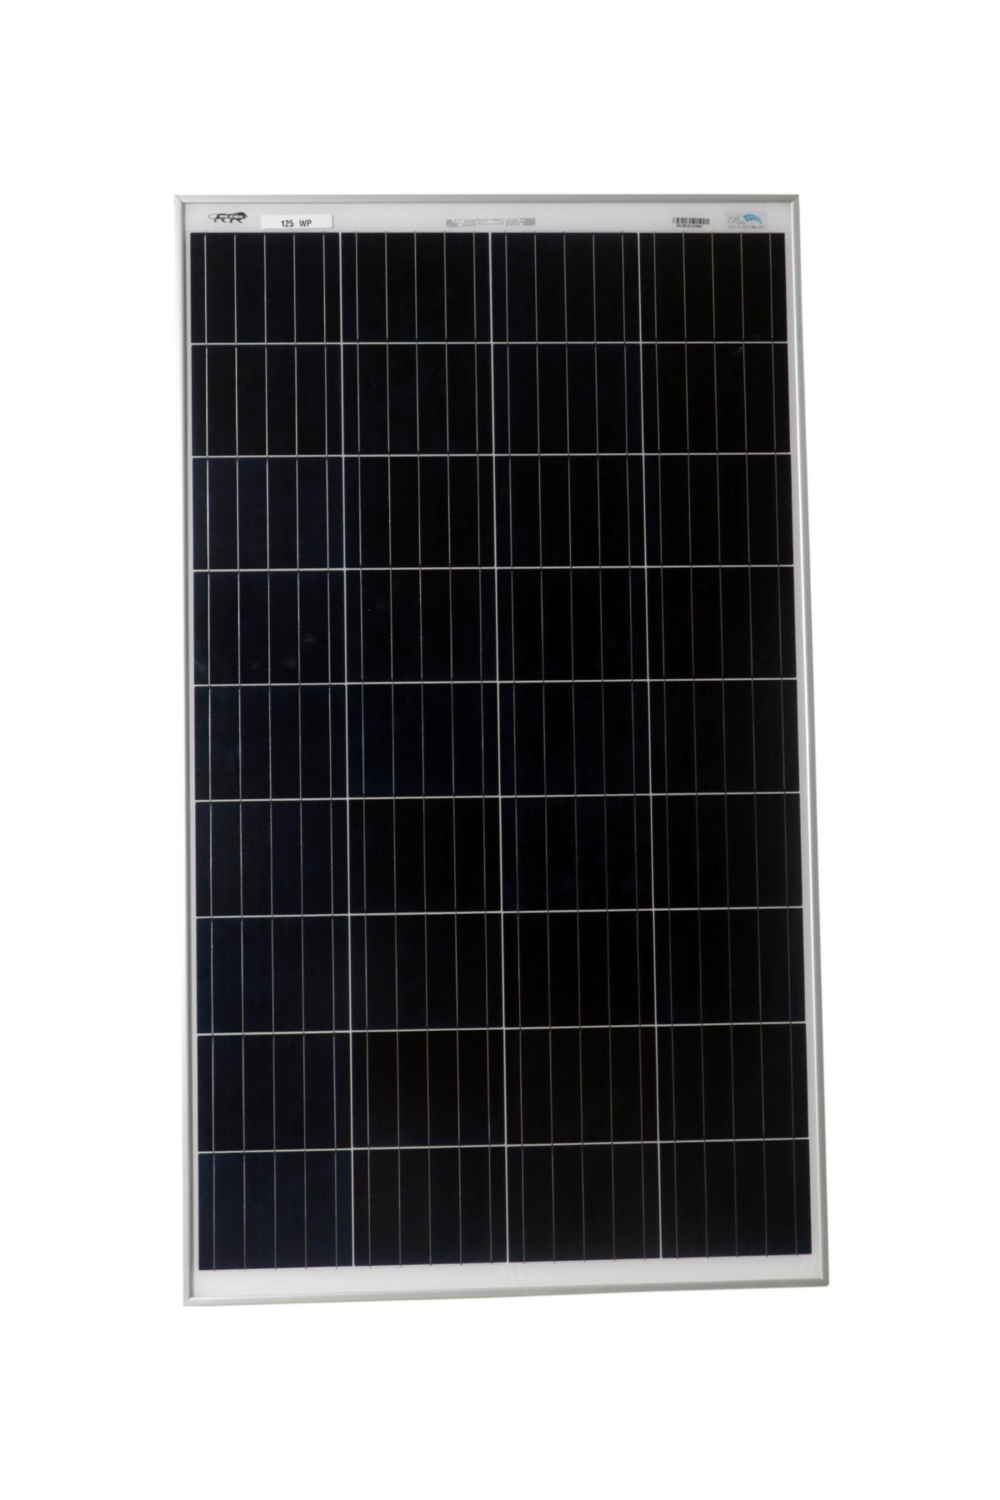 125 Watt 36 Cell Solar Panel Manufactured in India